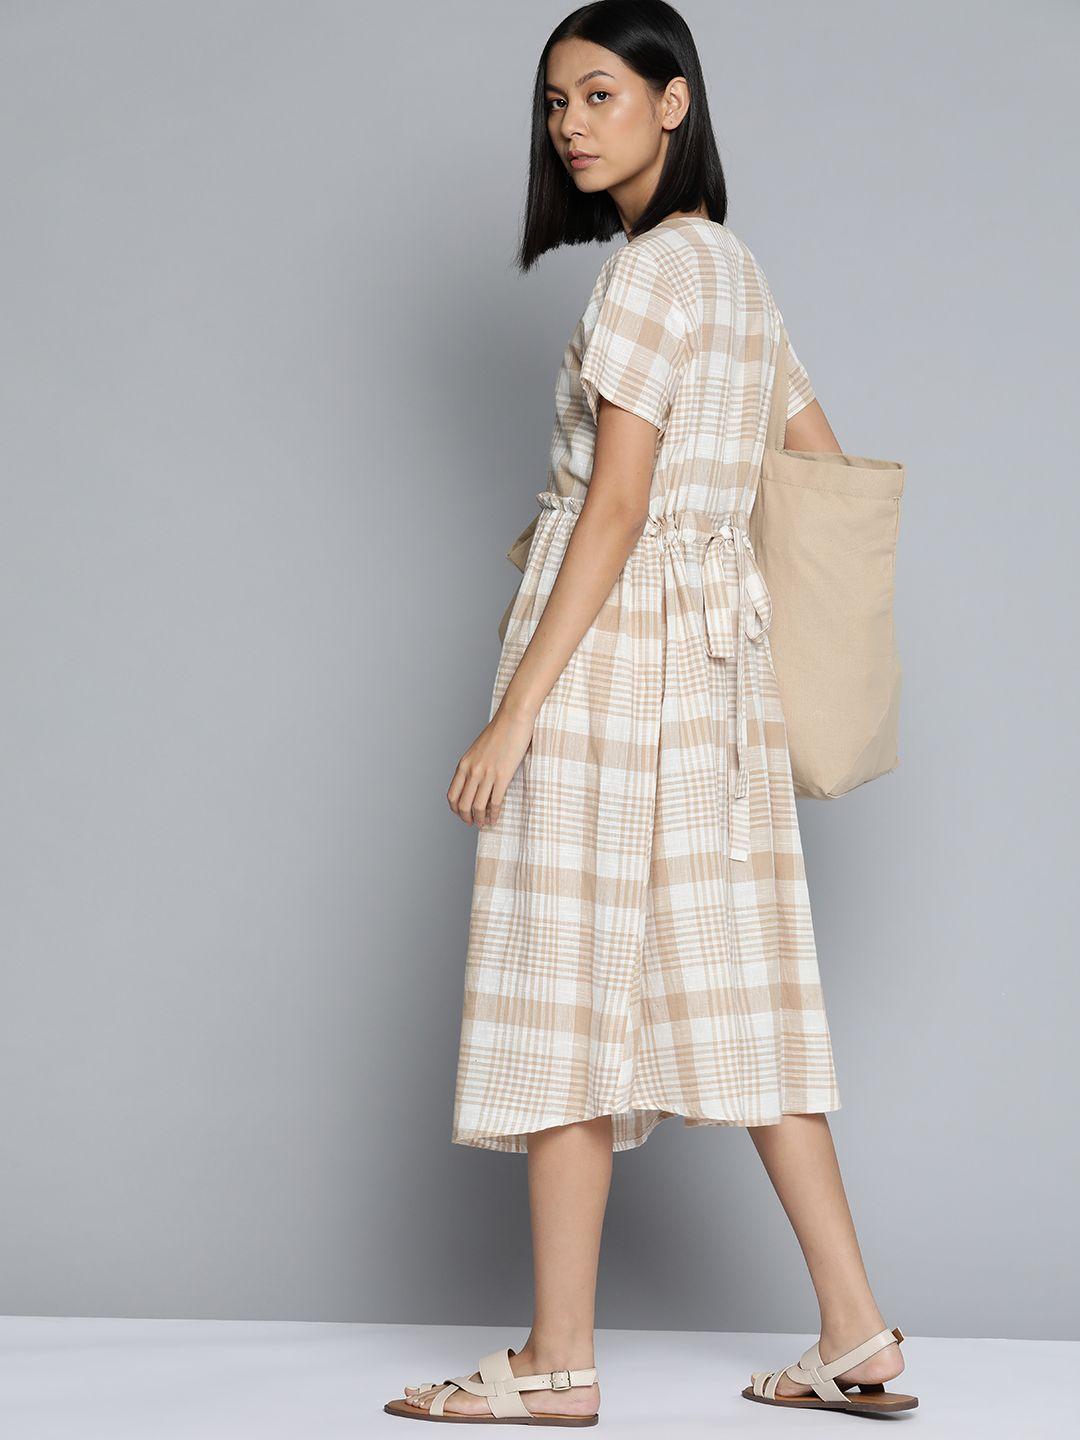 ether kora collection brown & white cotton sustainable unbleached fabric checked dress